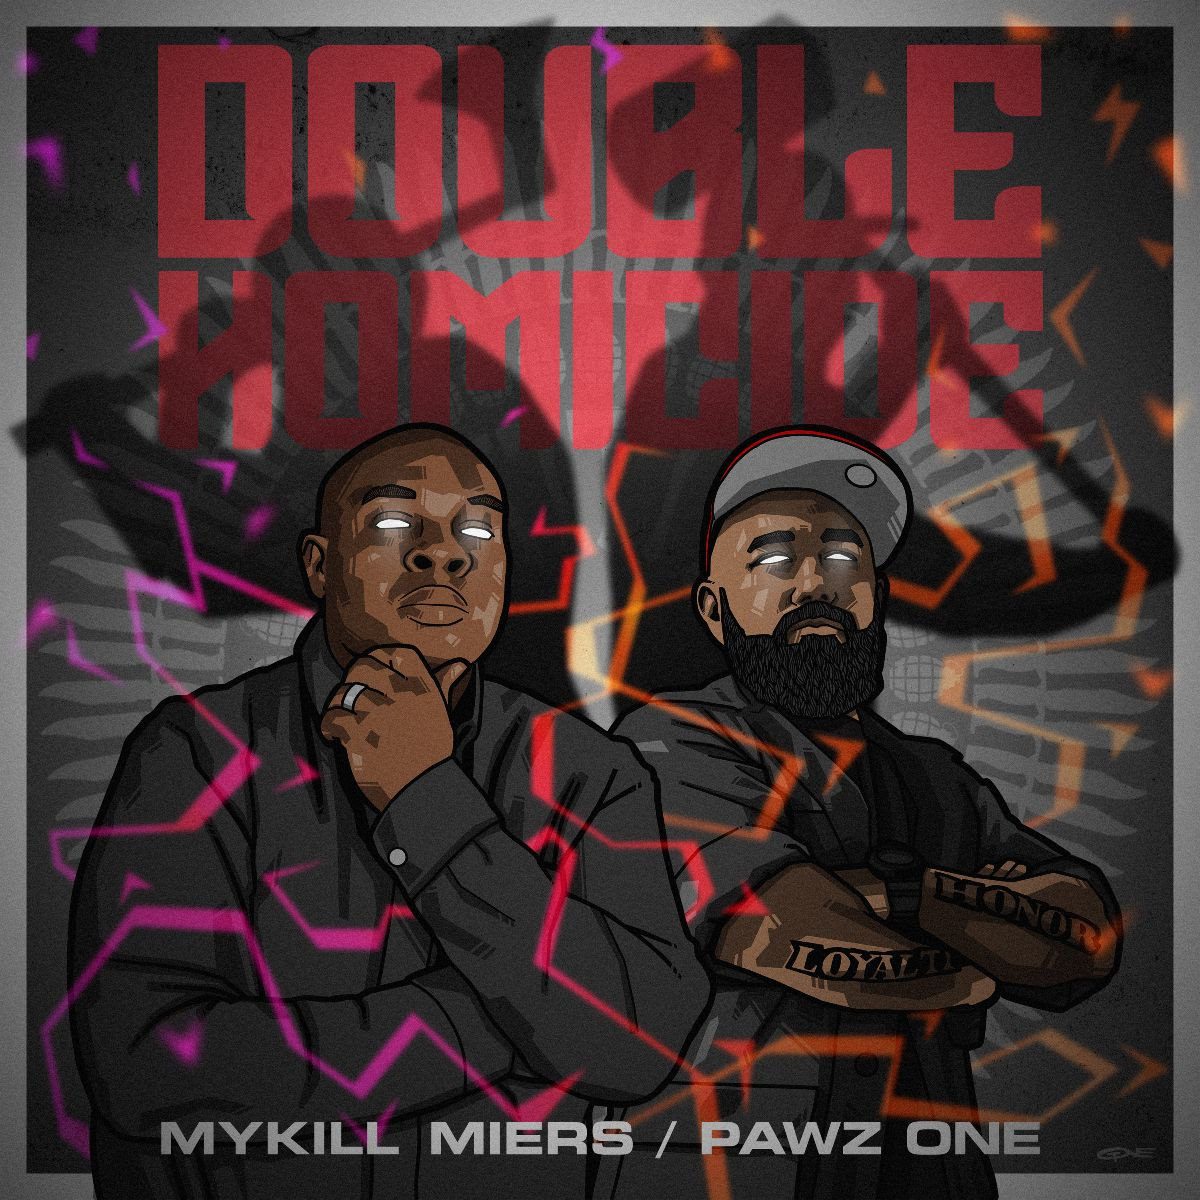 MYKILL MIERS & PAWZ ONE “DOUBLE HOMICIDE”